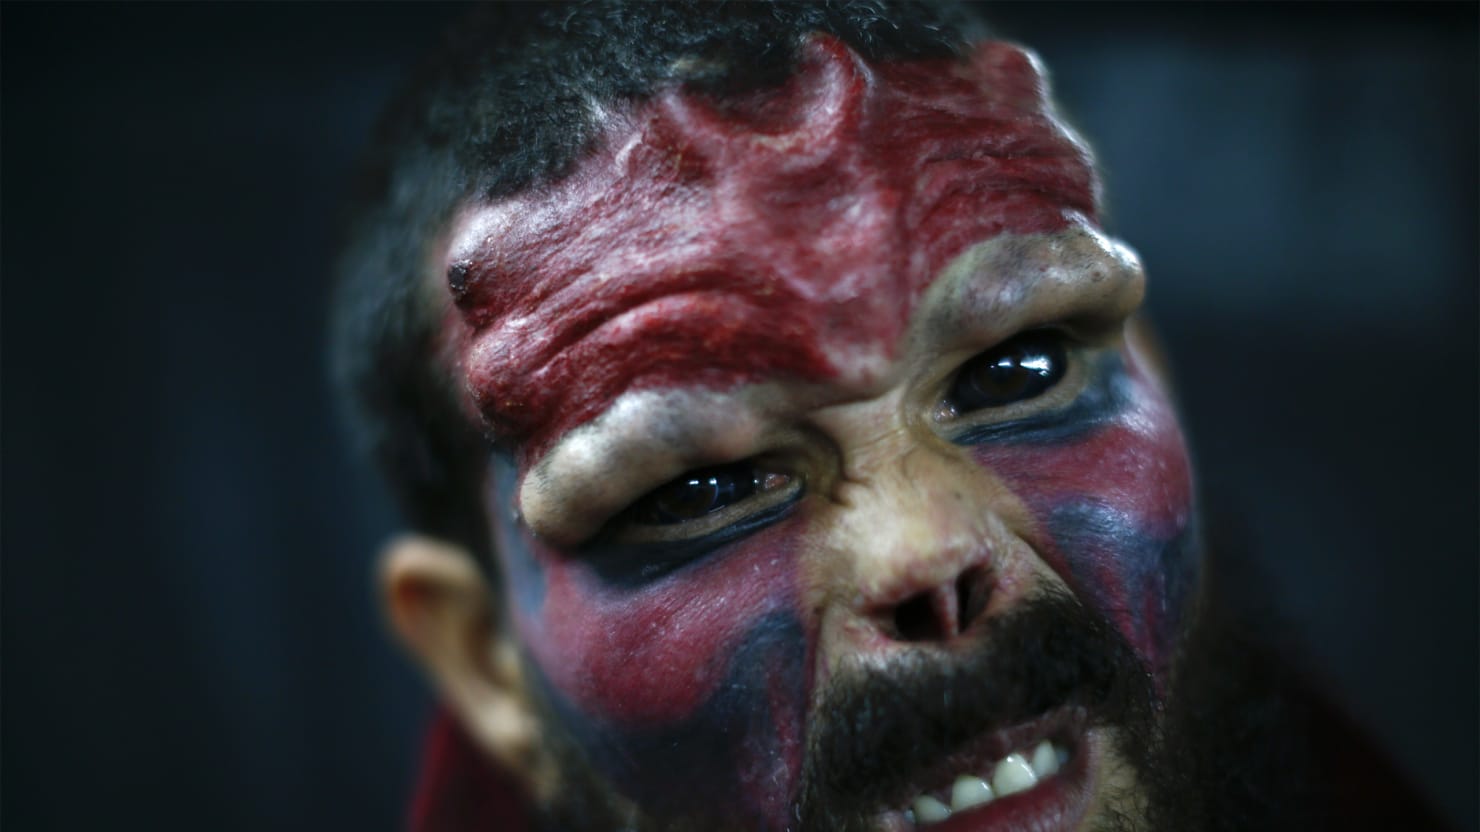 A Man Cut His Nose Off To Transform Into Marvel’s Captain ... - 1480 x 832 jpeg 71kB